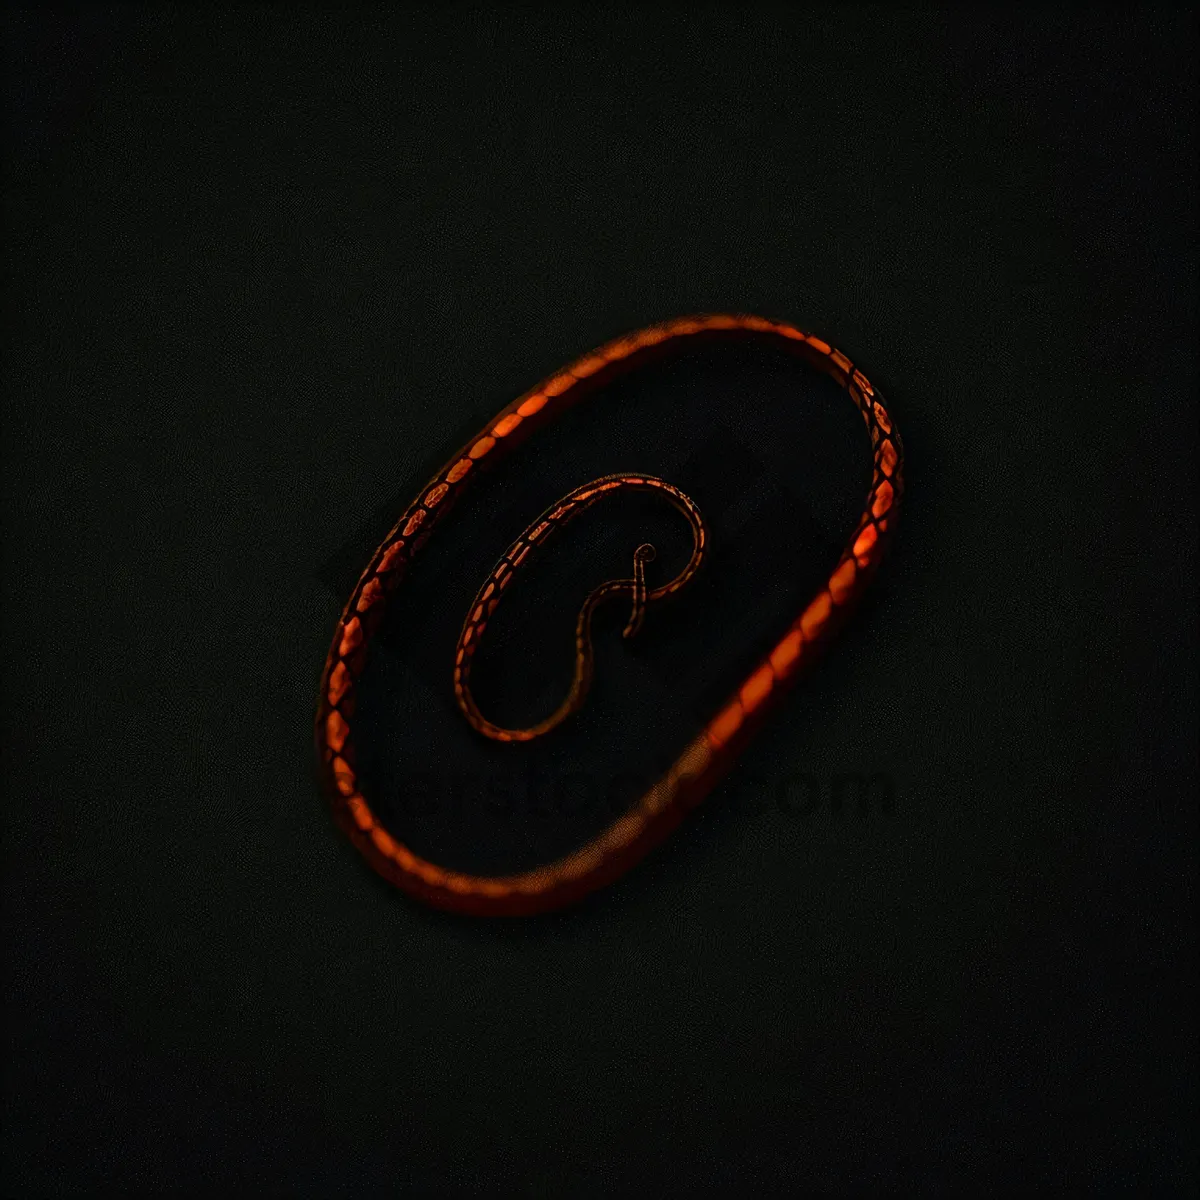 Picture of Elastic Black Coil: Artistic Spring Structure